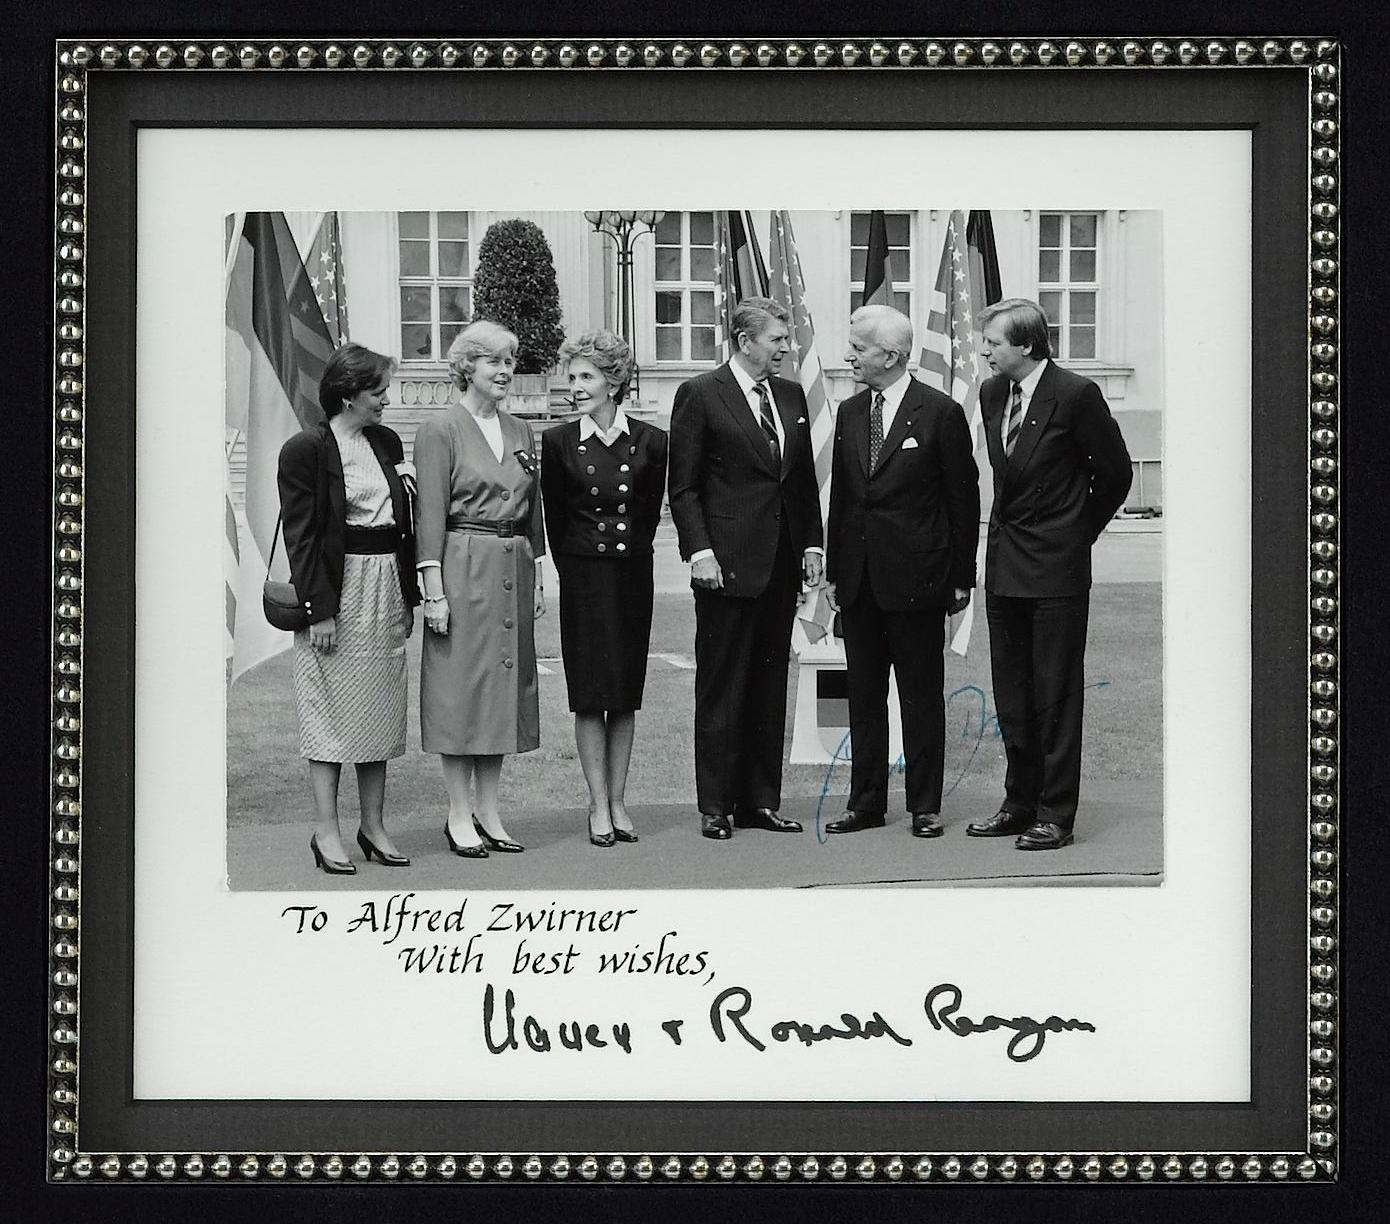 Presented is an original autographed photograph that has been signed by President Ronald Reagan, First Lady Nancy Reagan, and West German Mayor Eberhard Diepgen. Eberhard Diepgen was the Mayor of West Berlin from 1984 to 1989 and later served as